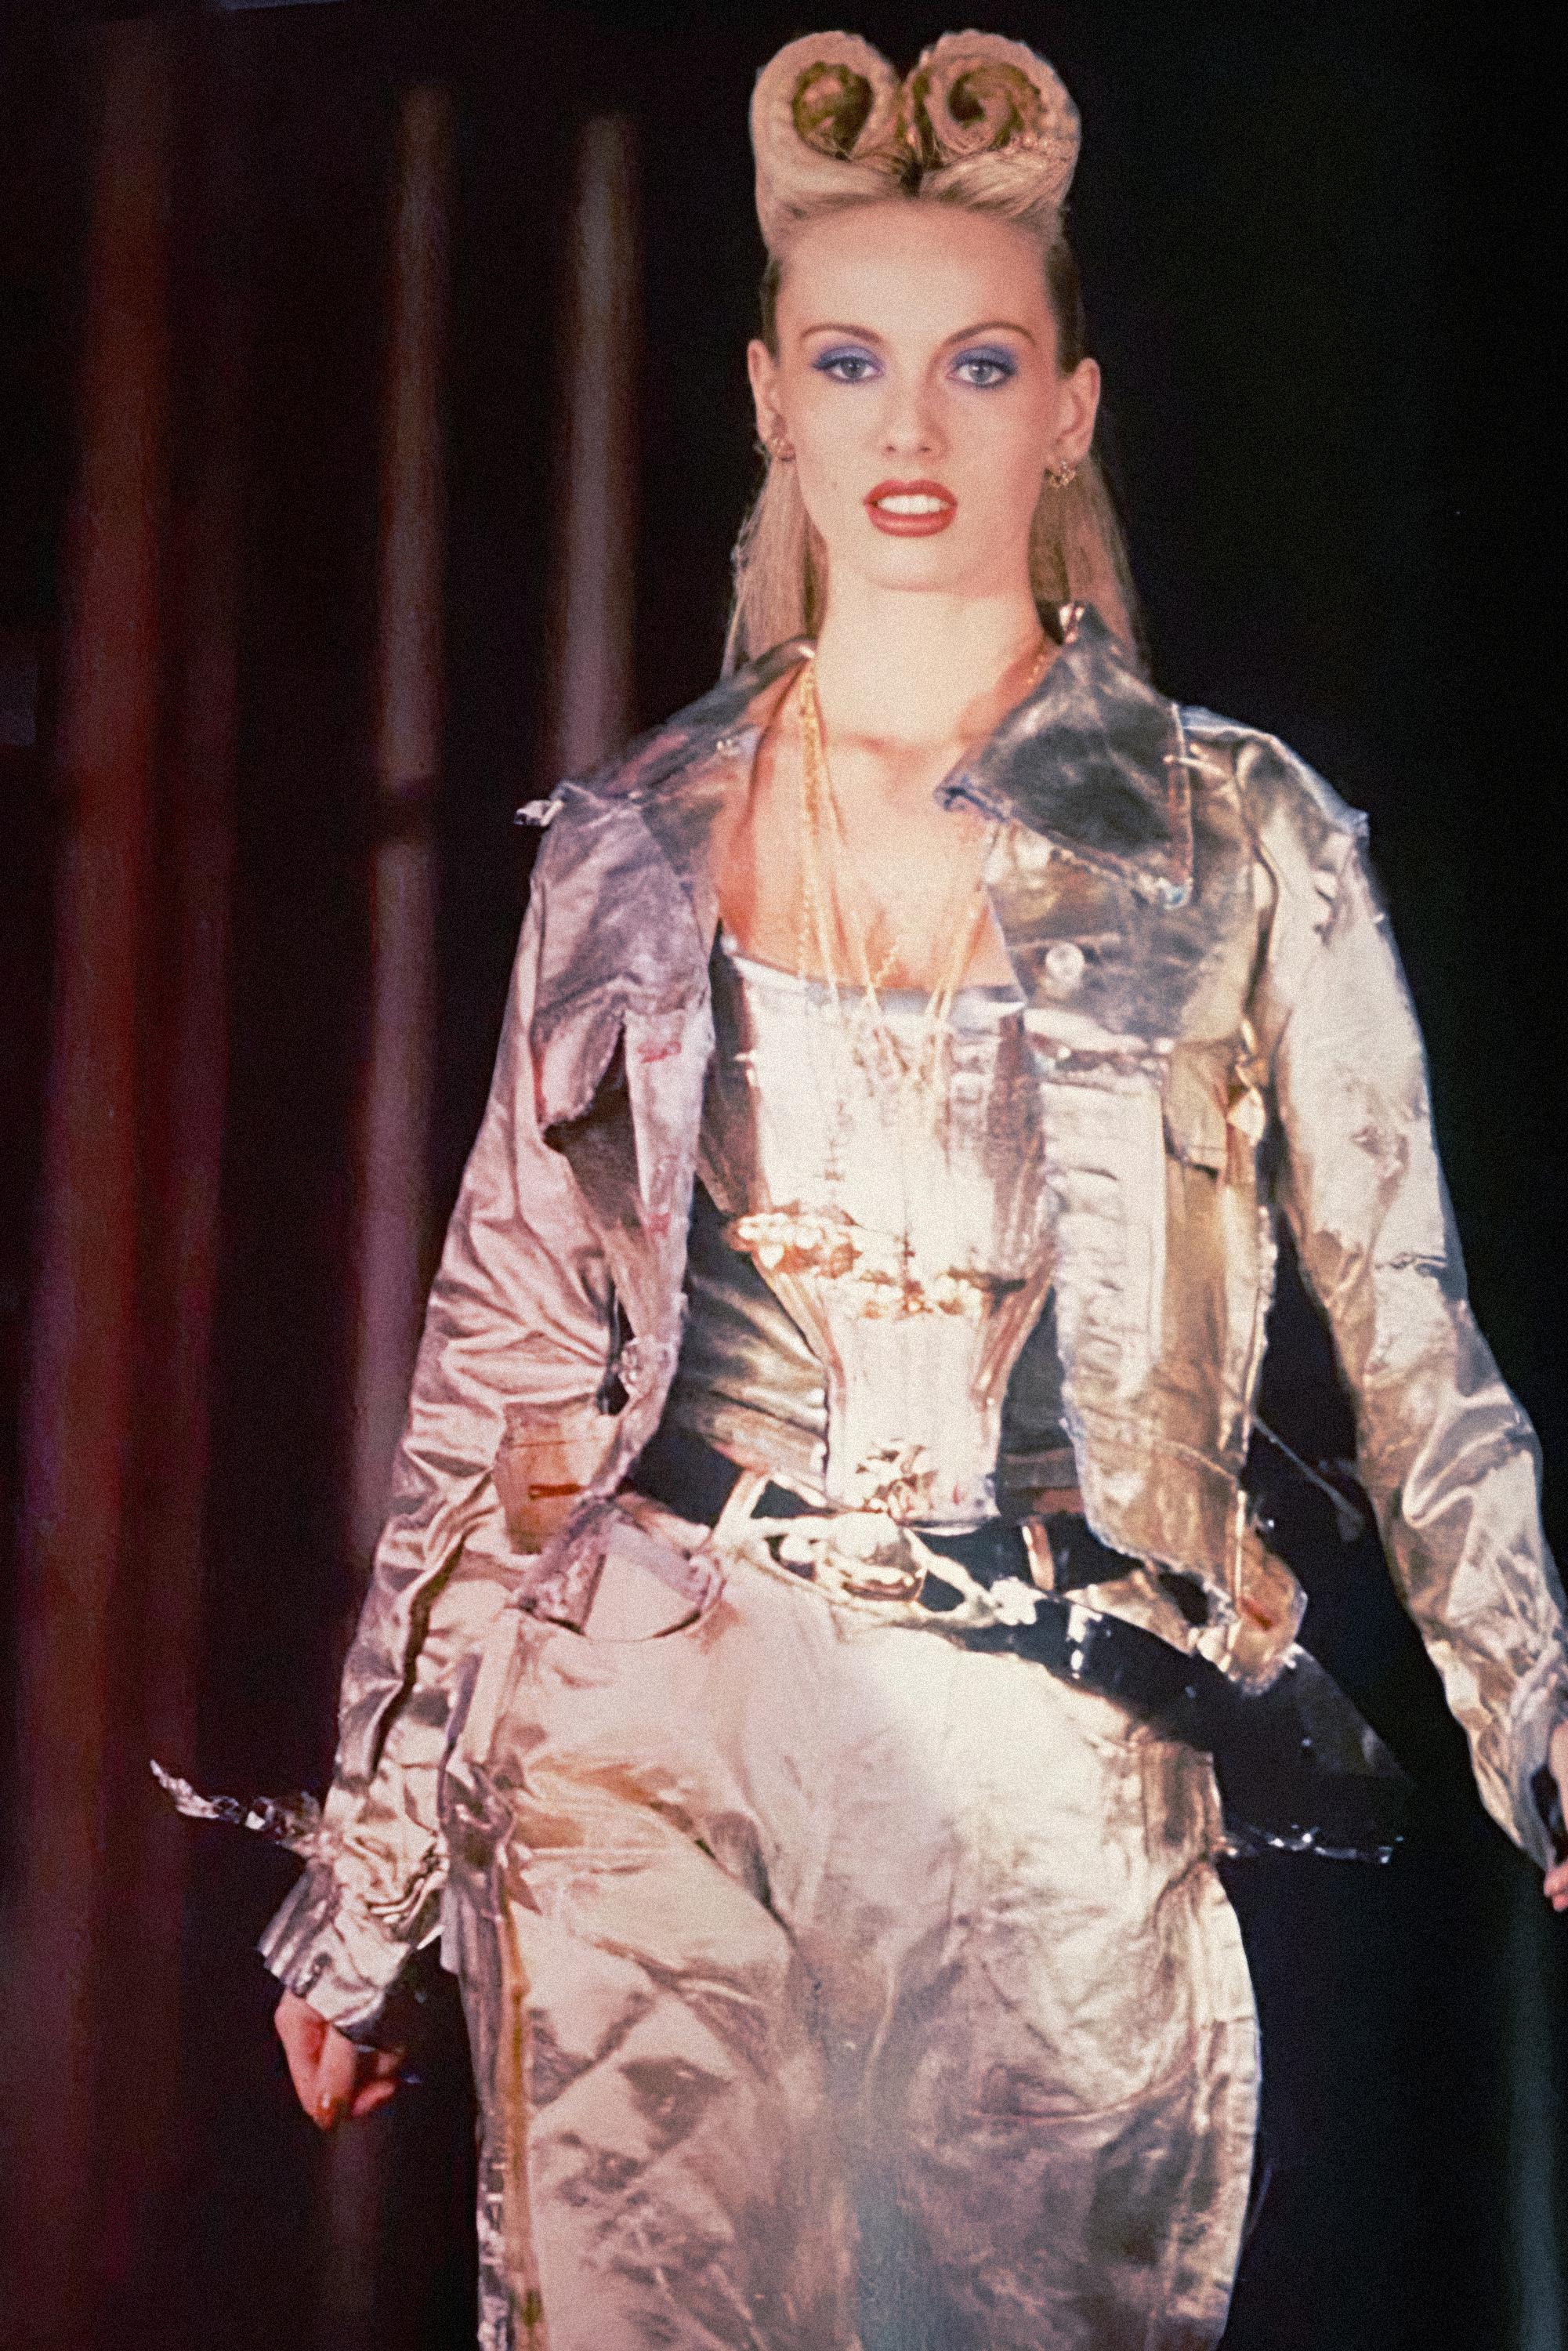 This Vivienne Westwood gold-painted denim jacket is from the Spring-Summer 1993 ‘Grand Hotel’ collection. Made from cotton denim, this jacket features a metallic gold coating that gives it a distinctive and eye-catching appearance. The coating is